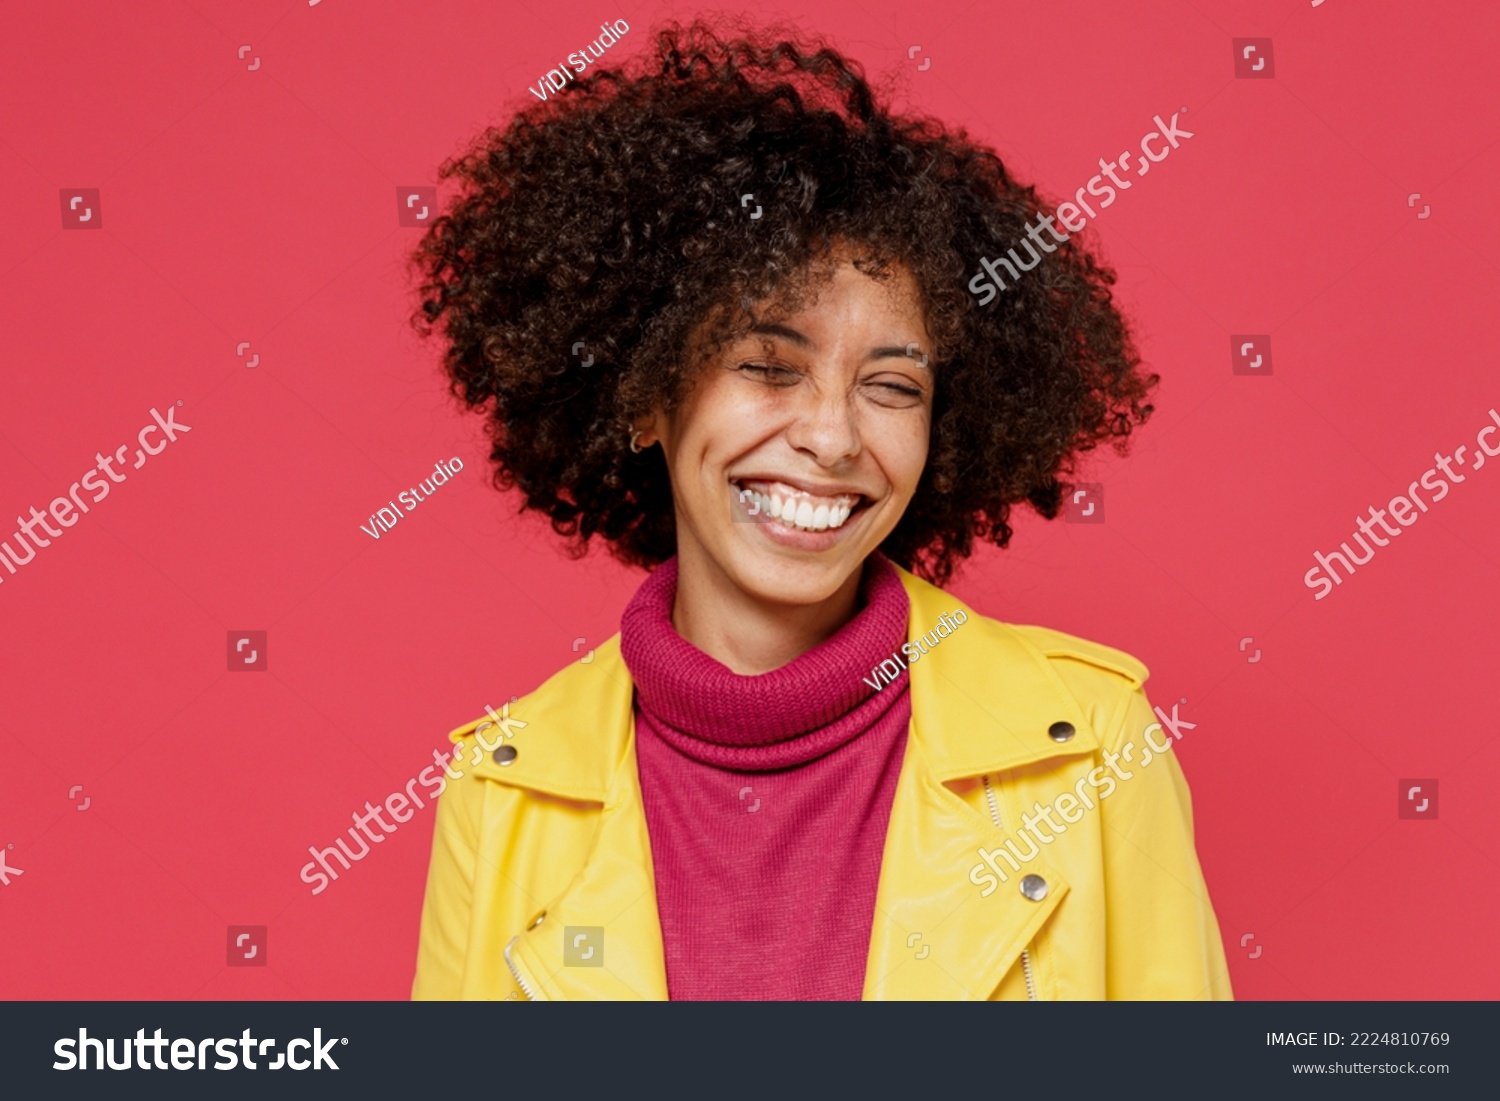 Laughing bright happy fun young curly black latin woman 20s years old wears yellow jacket keep eyes closed smiling isolated on plain red background studio portrait. People emotions lifestyle concept #2224810769